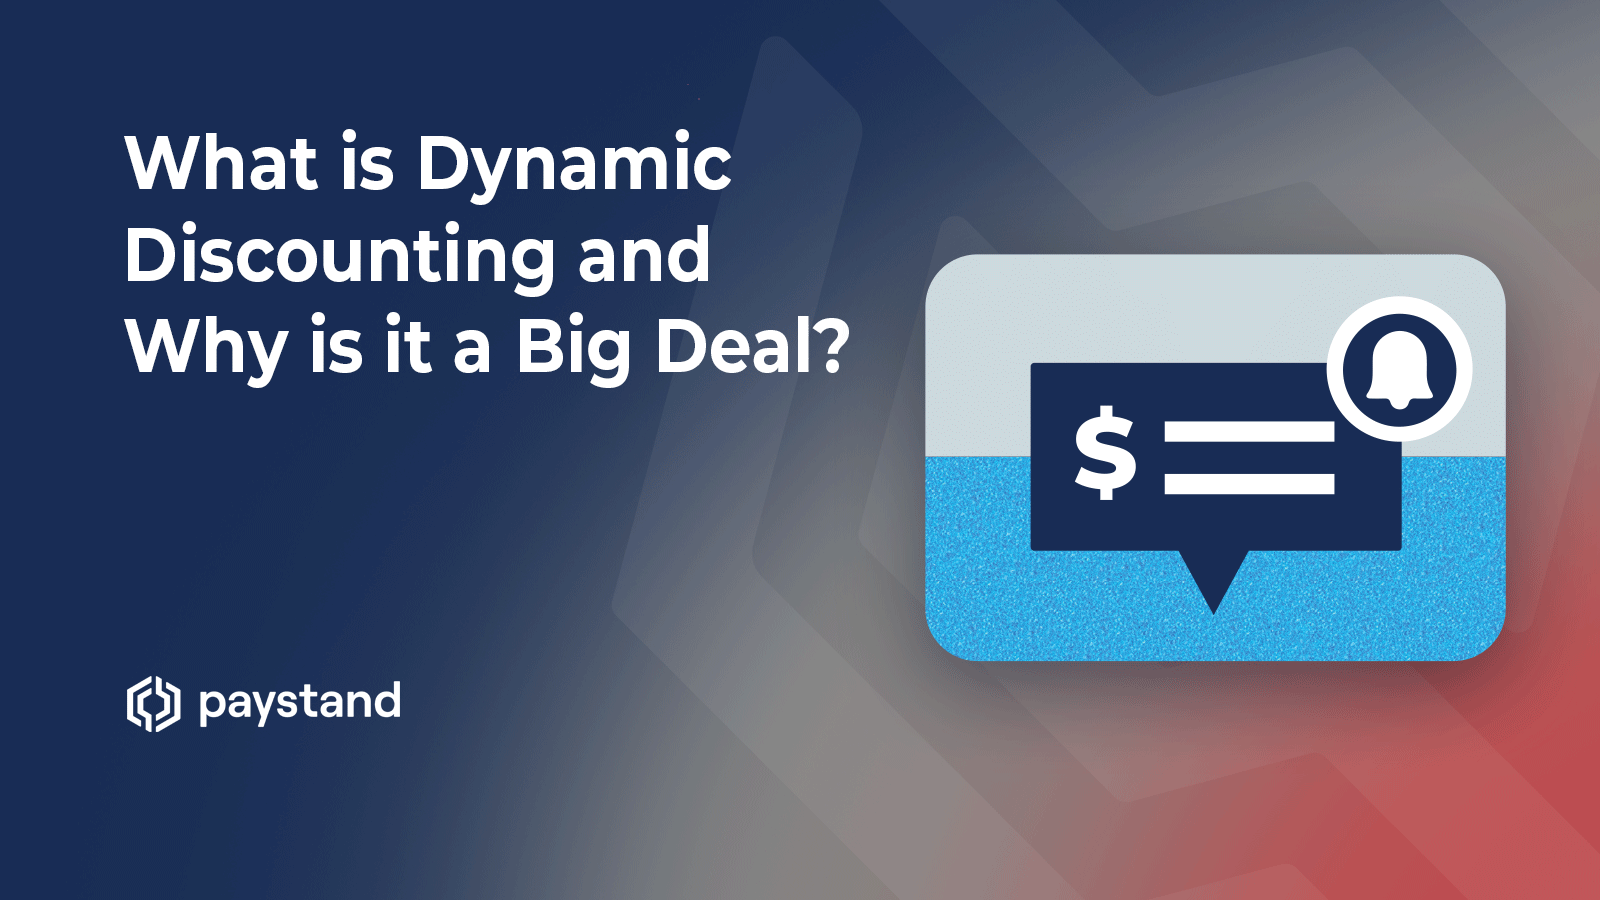 What is Dynamic Discounting and Why is it a Big Deal?